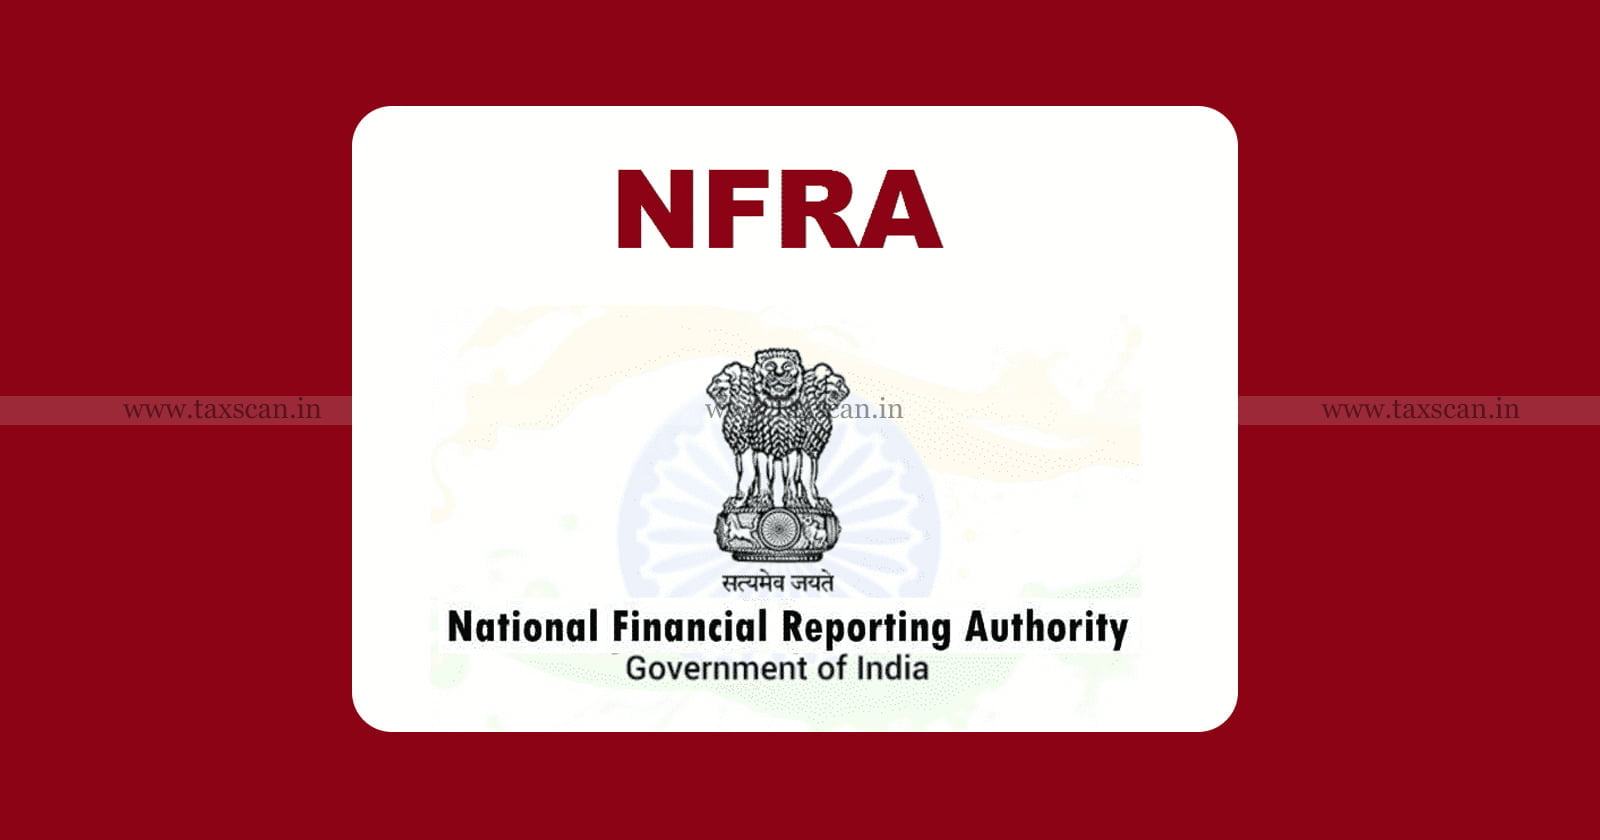 NFRA - MHRIL - Auditor - Accounting Policies - Taxscan